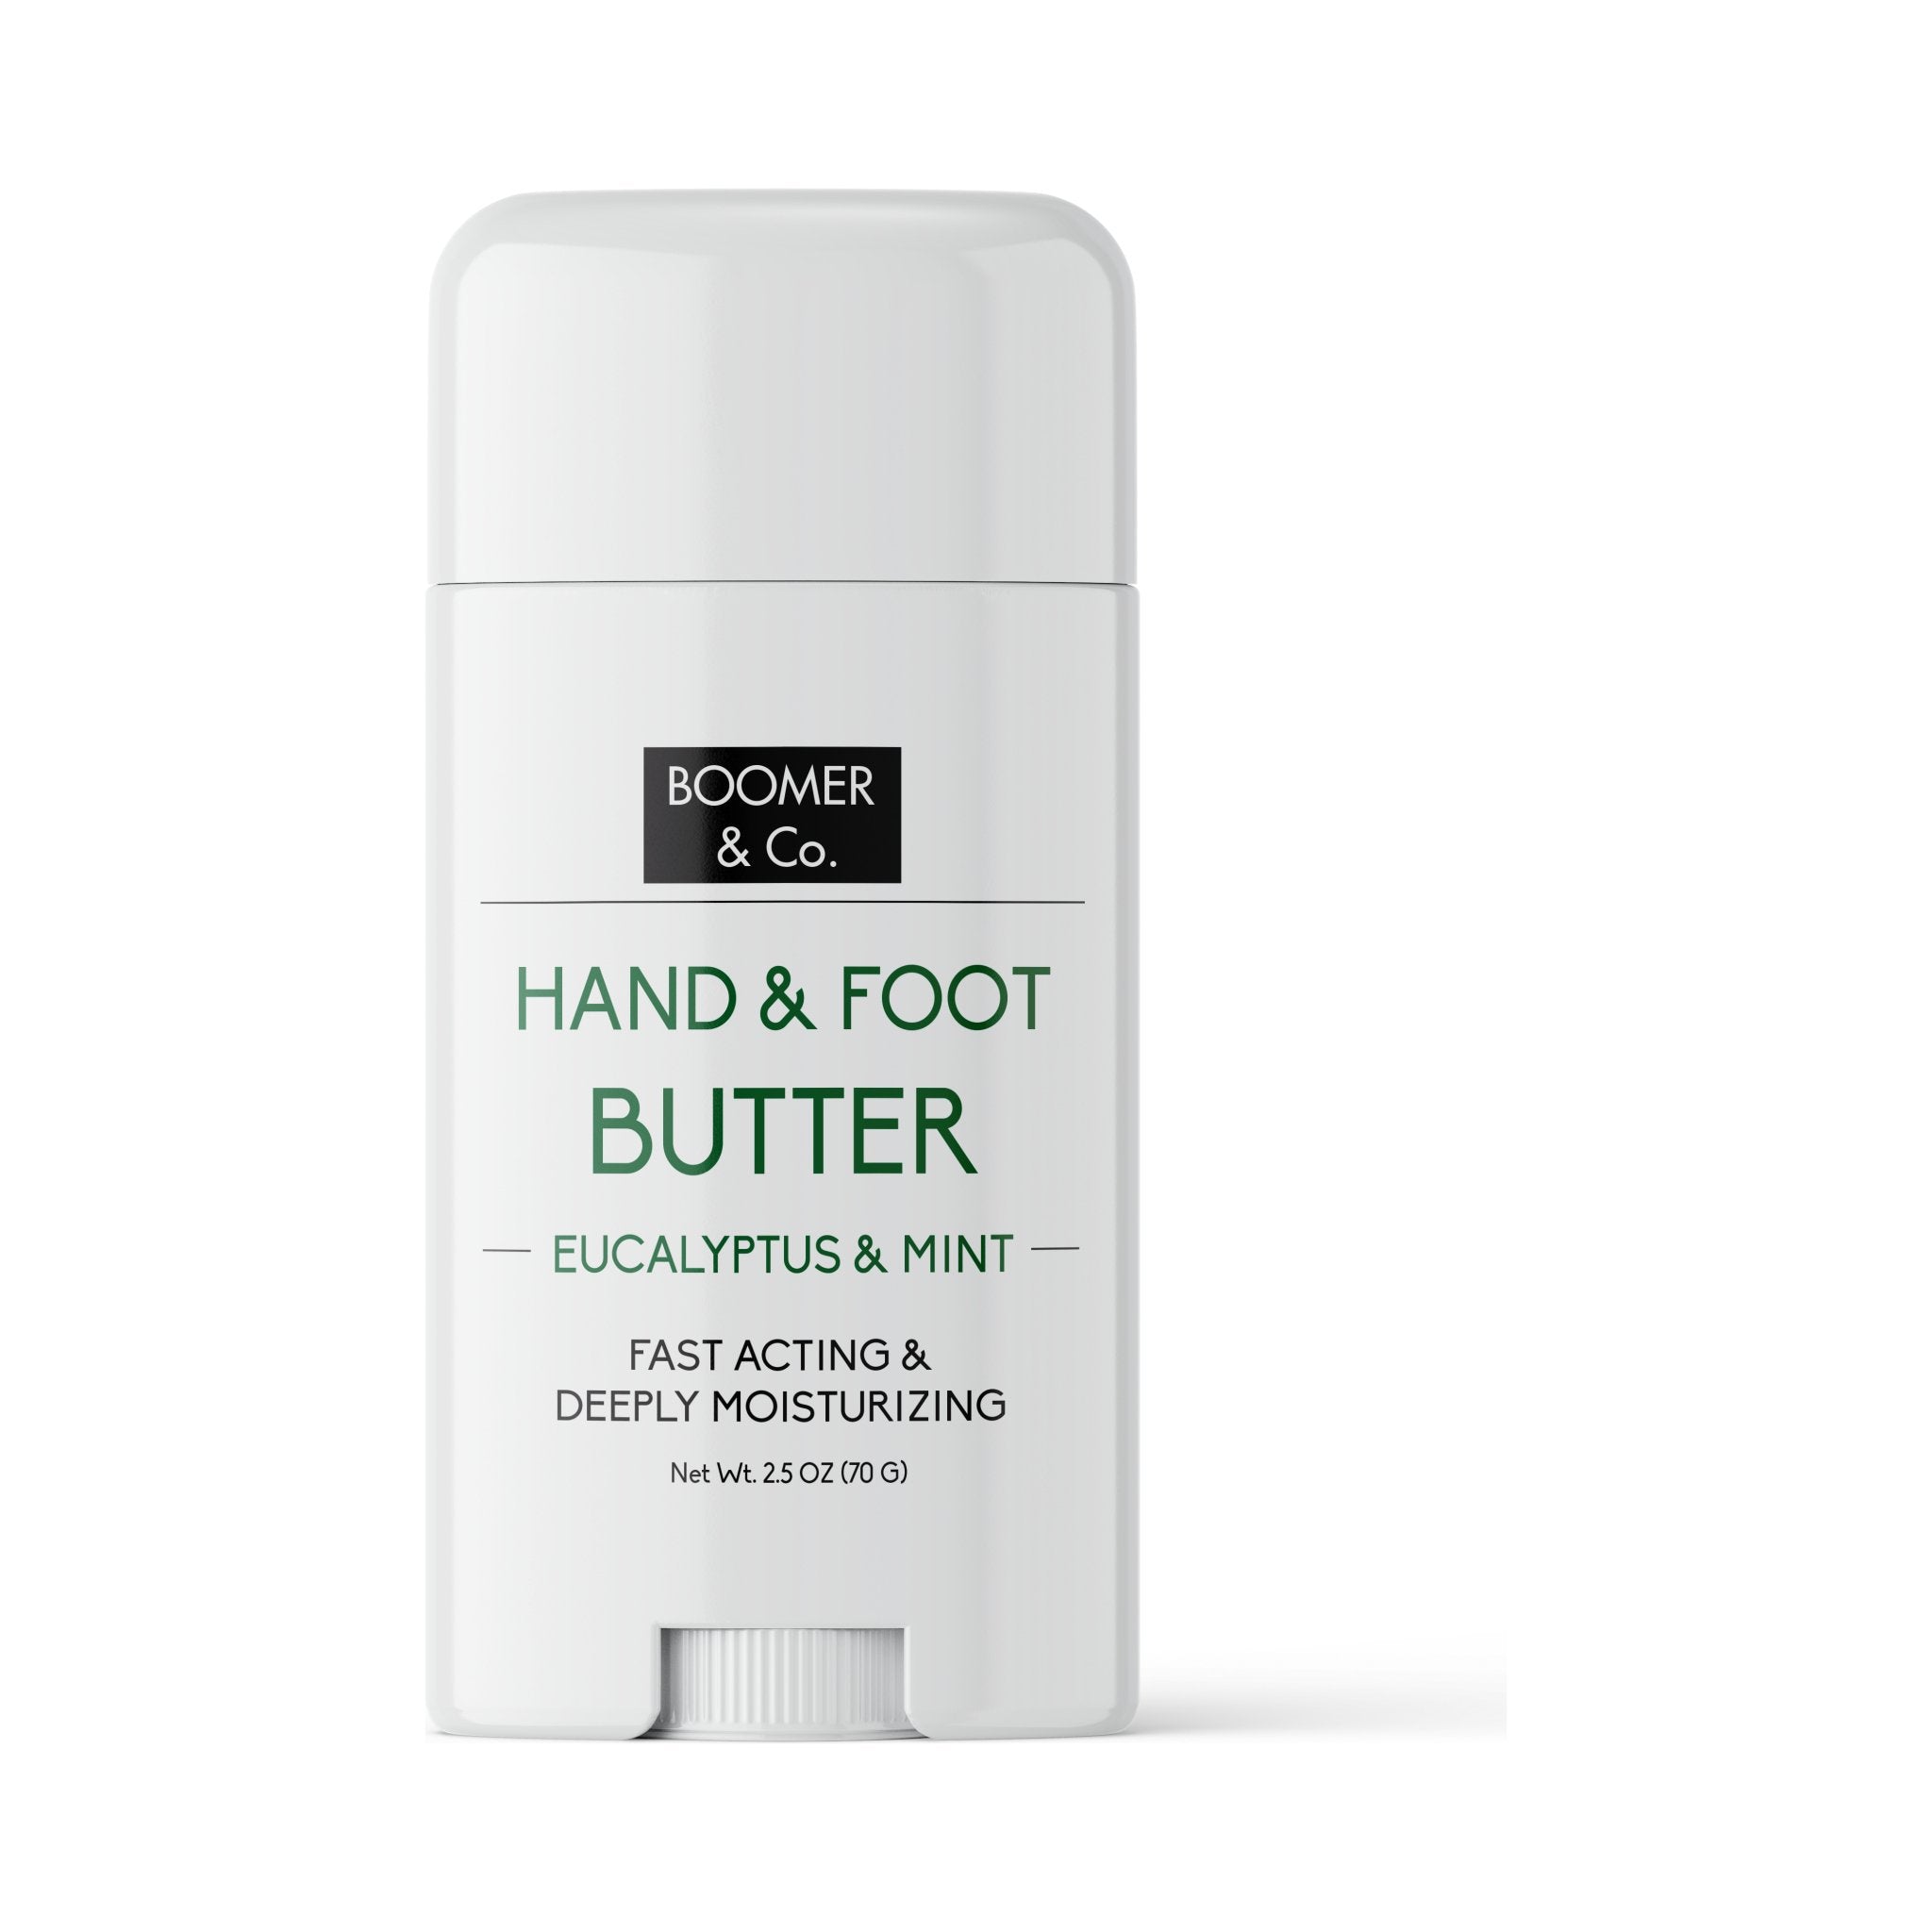 Best Natural Hand & Foot Moisturizing Butter - KME means the very best